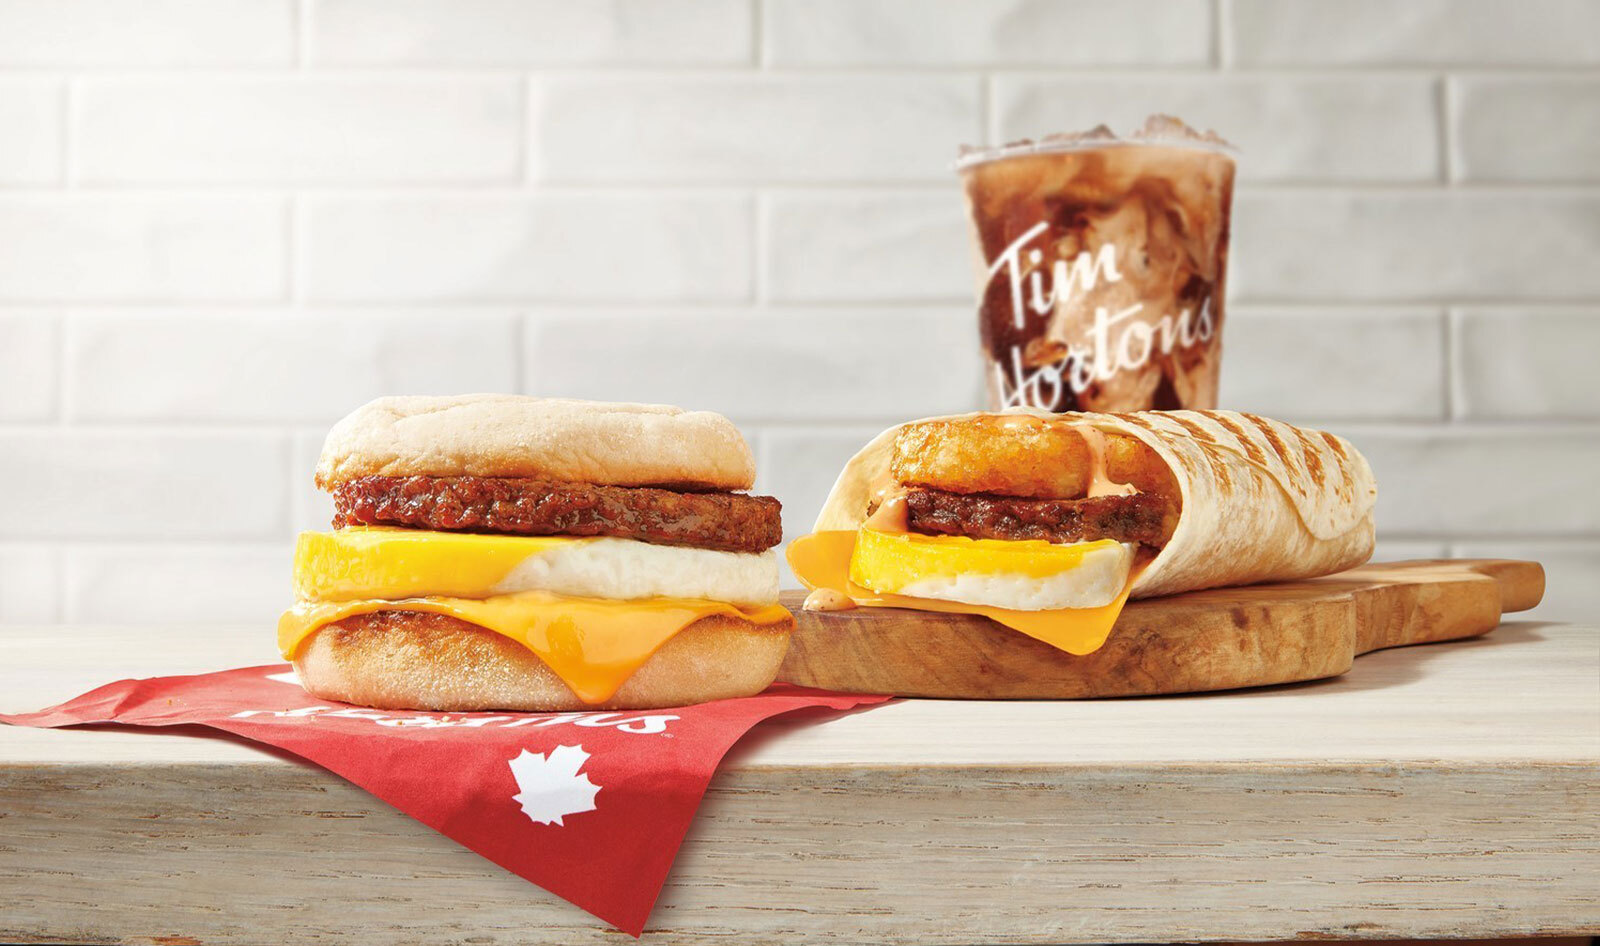 Tim Hortons Brings Back Plant-Based Meat Options With Impossible Sausage